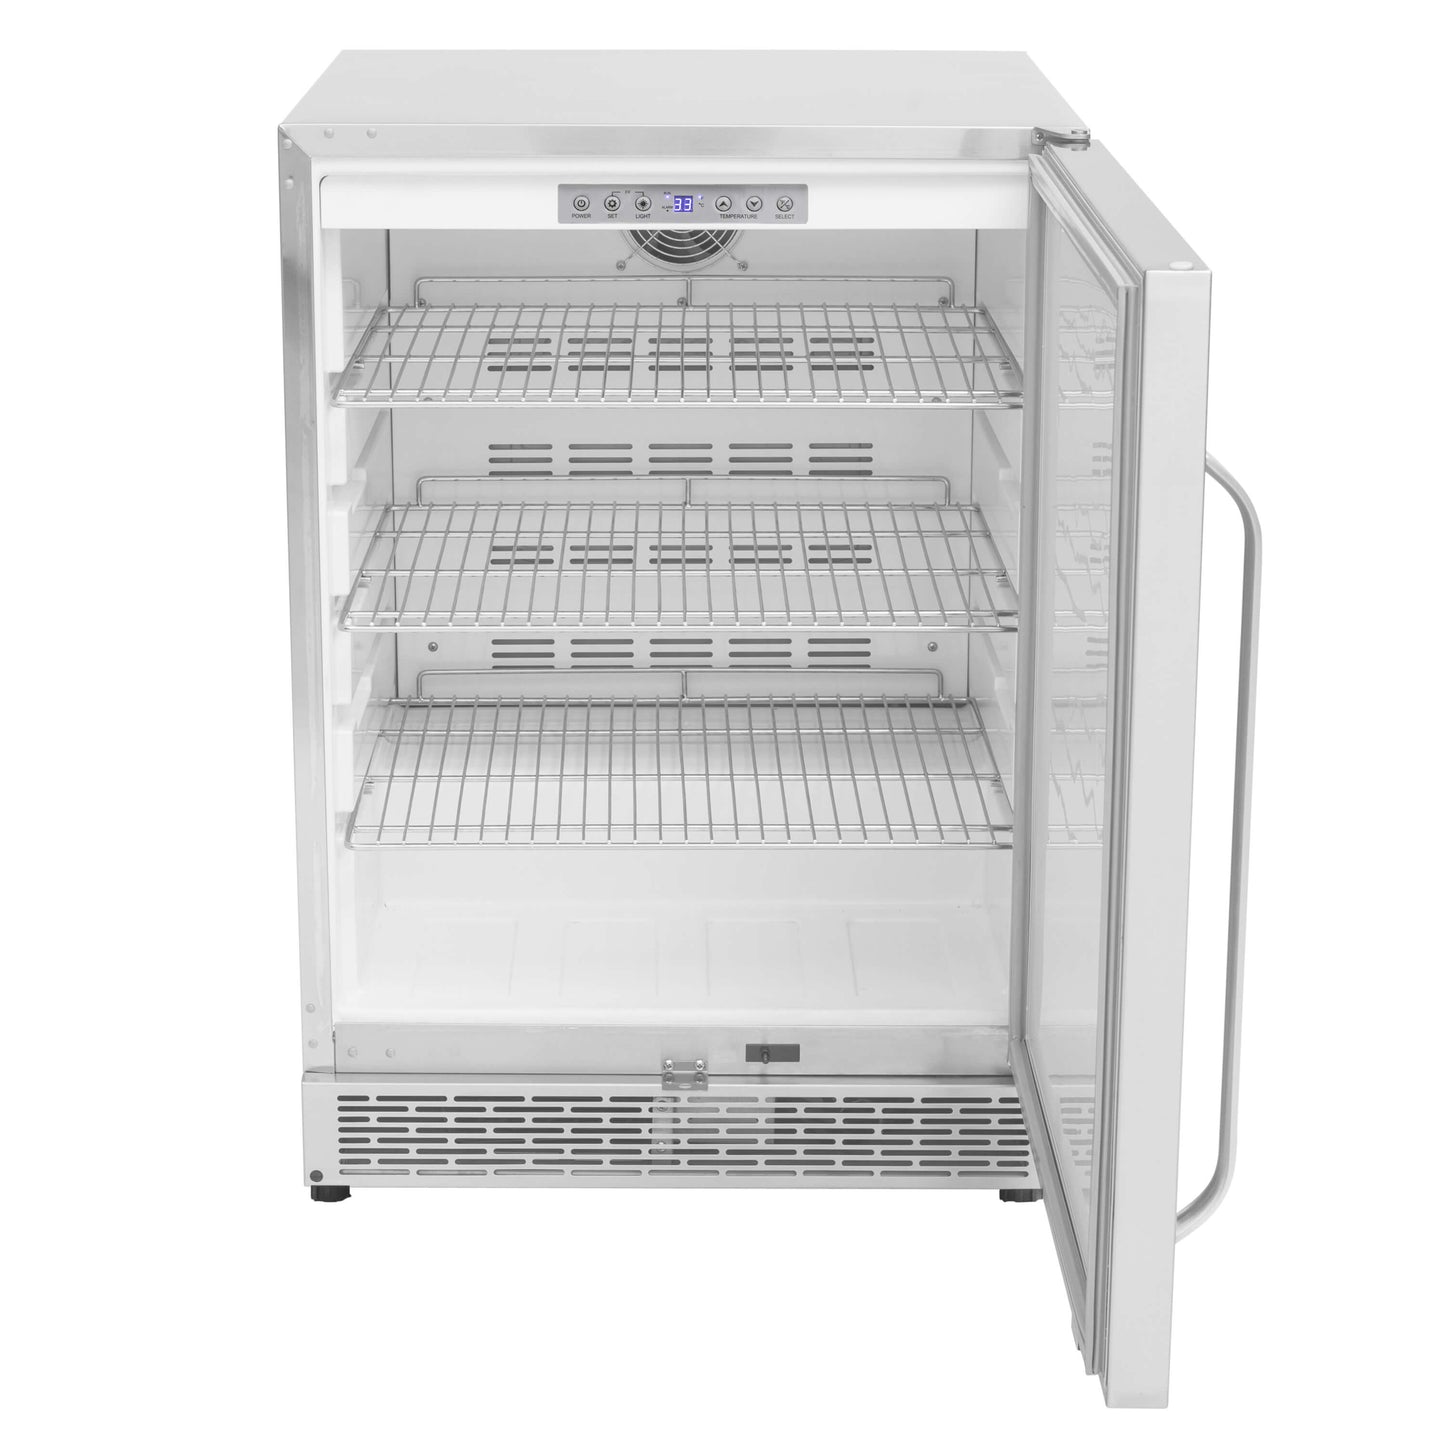 Whynter Refrigerators Whynter BOR-53024-SSW/BOR-53024-SSWa Energy Star 24″ Built-in Outdoor 5.3 cu.ft. Beverage Refrigerator Cooler Full Stainless Steel Exterior with Lock and Optional Caster Wheels